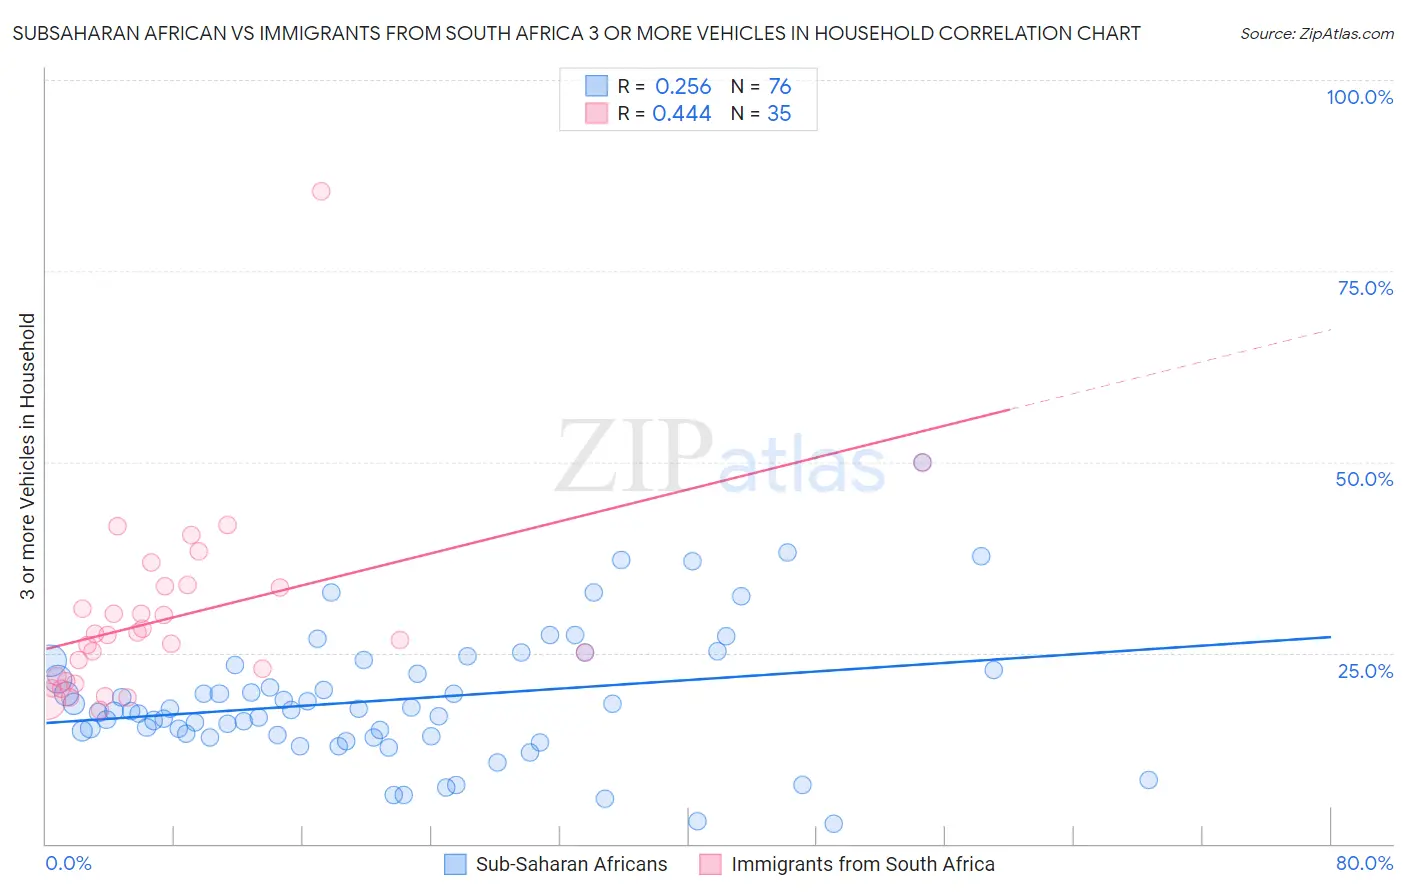 Subsaharan African vs Immigrants from South Africa 3 or more Vehicles in Household